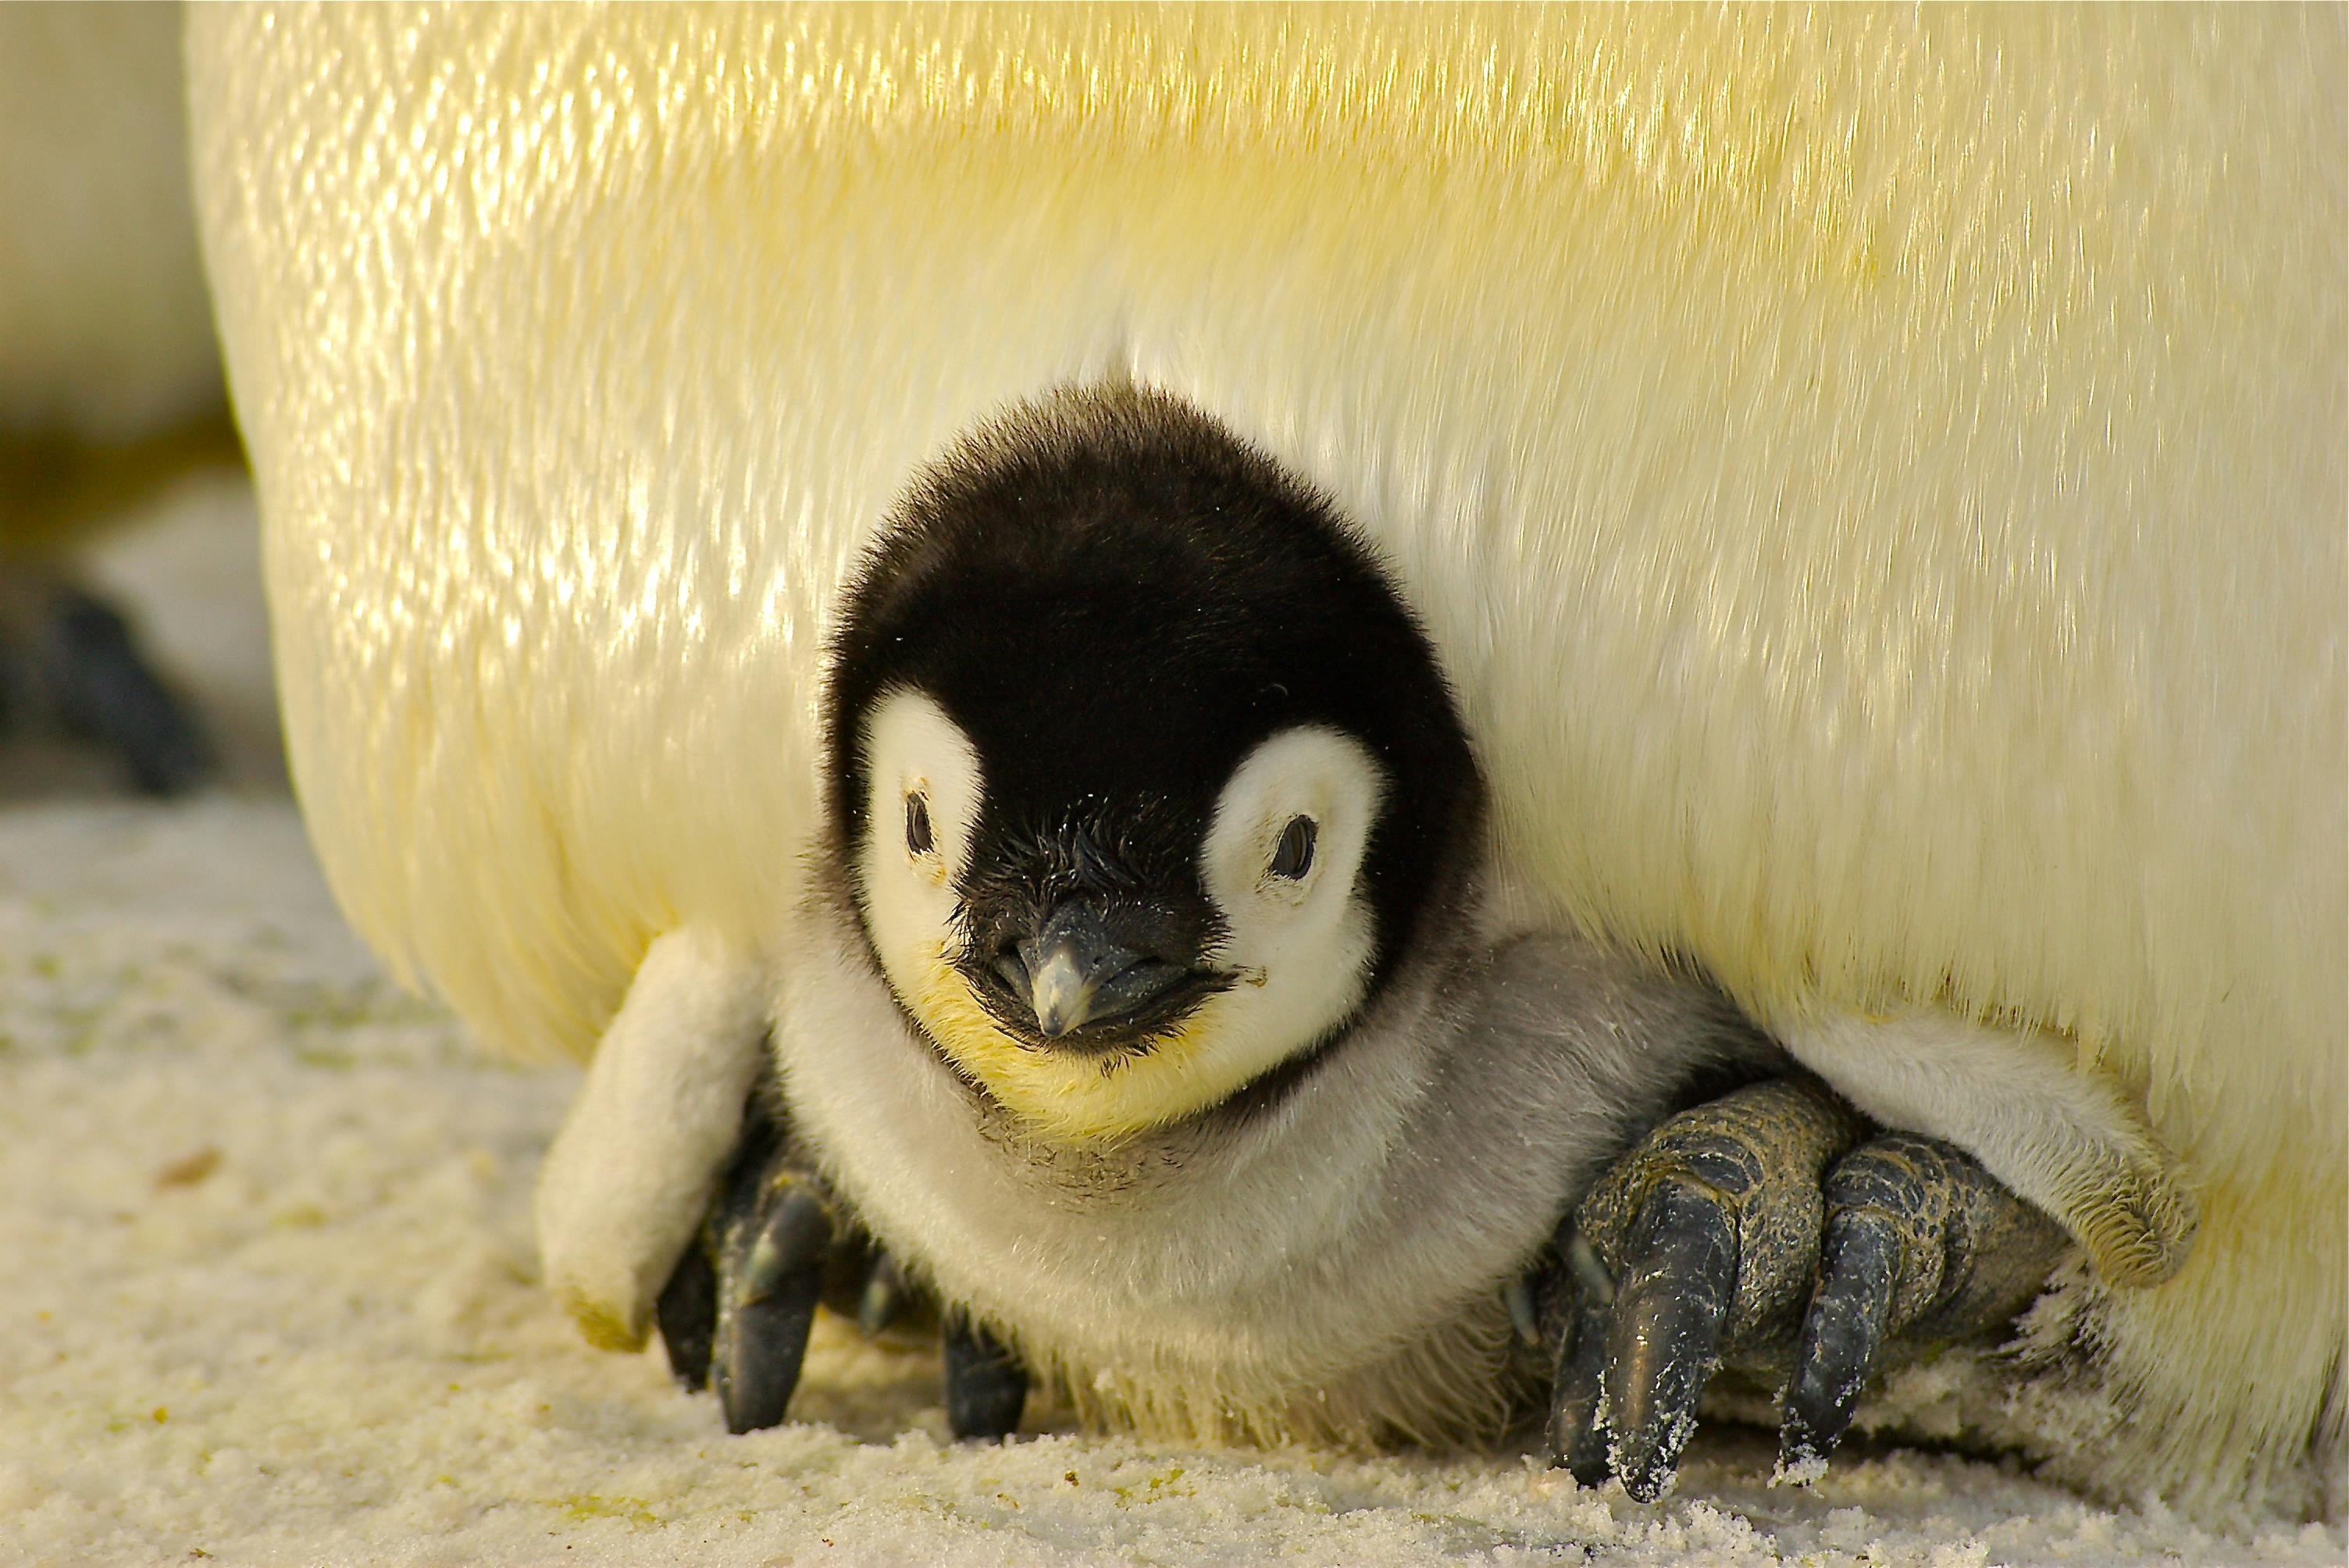 Baby Penguin Pictures  Download Free Images on Unsplash